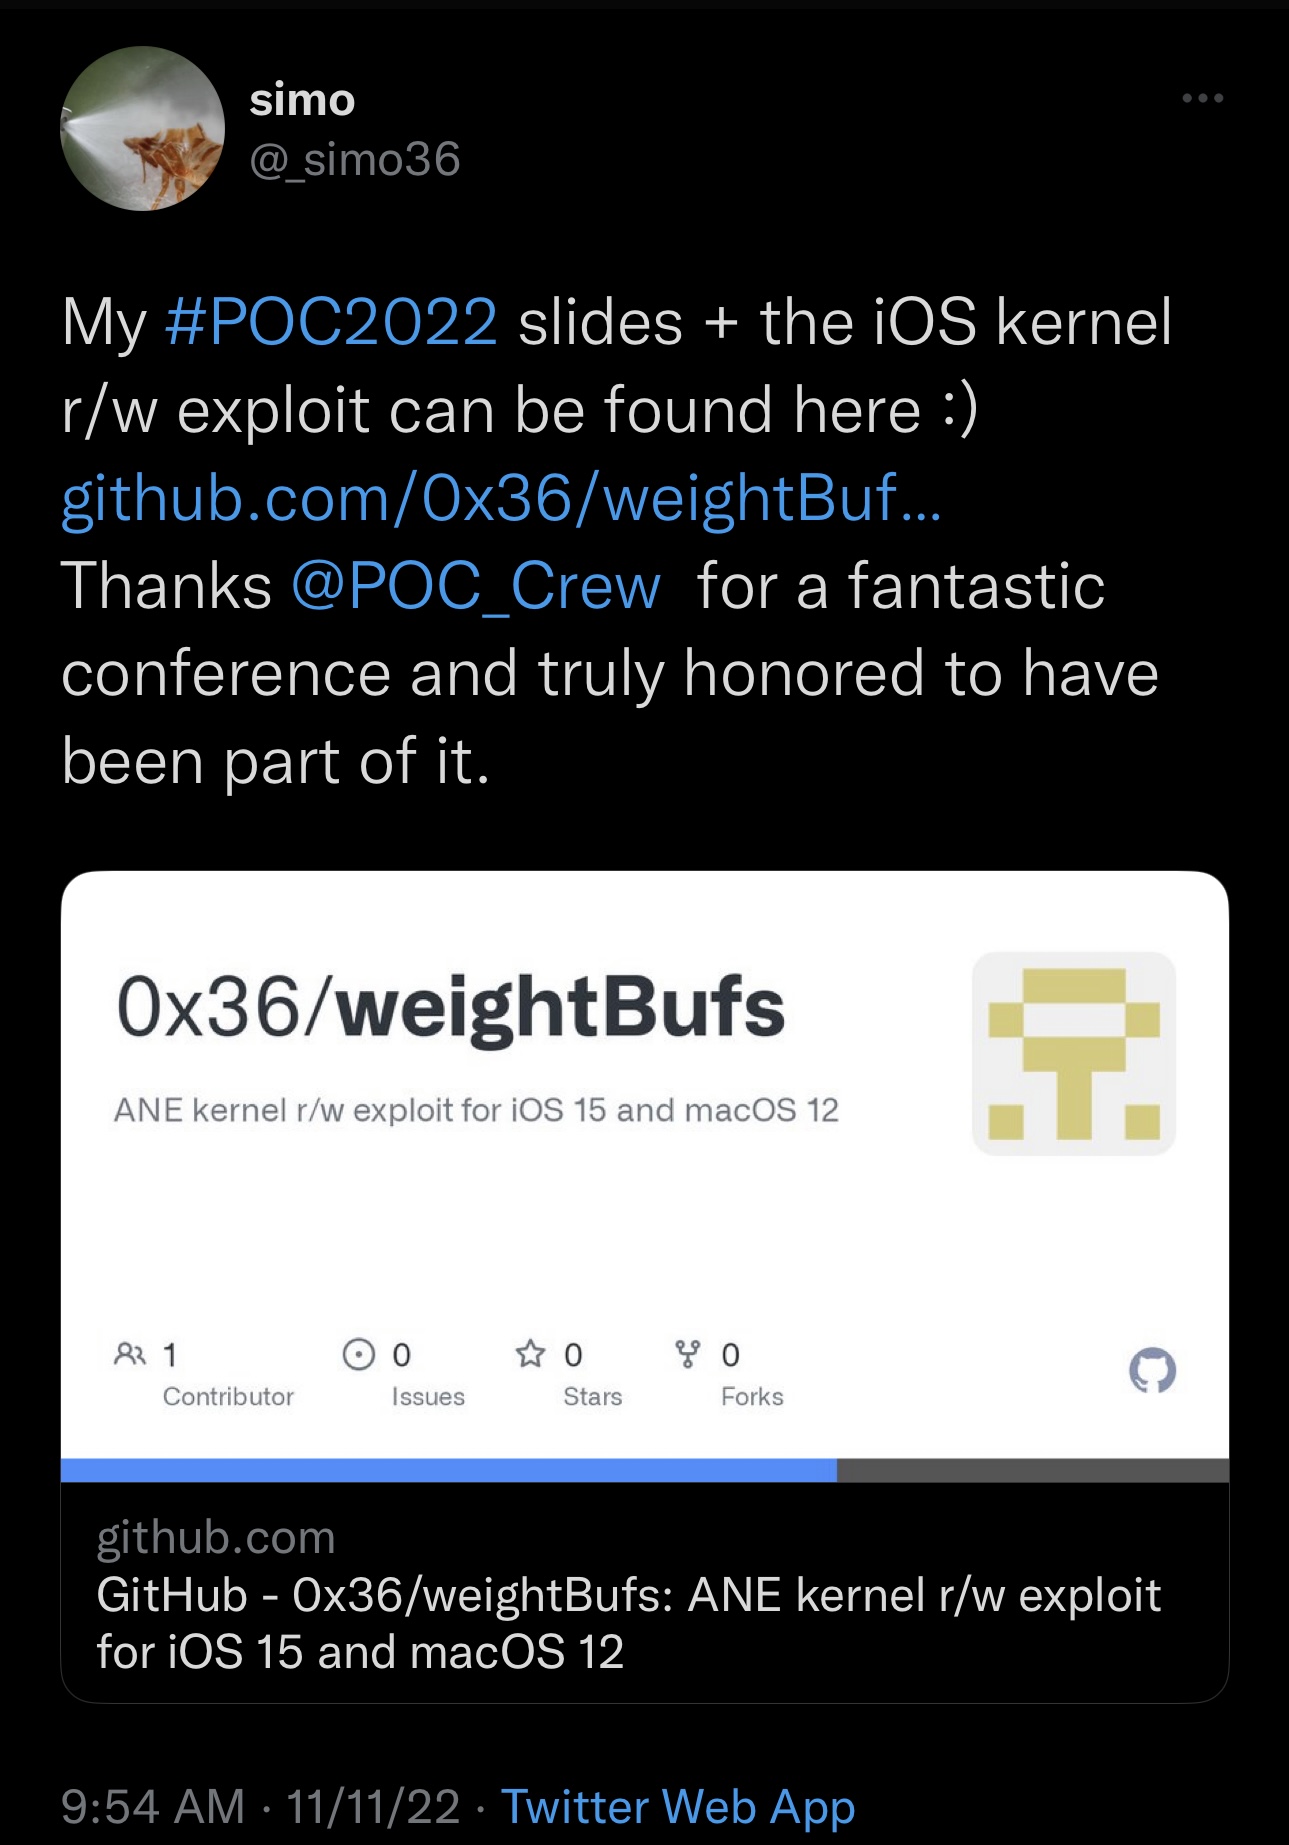 Security researcher @_simo36 releases a PoC of their iOS 15 kernel exploit chain with r/w access.